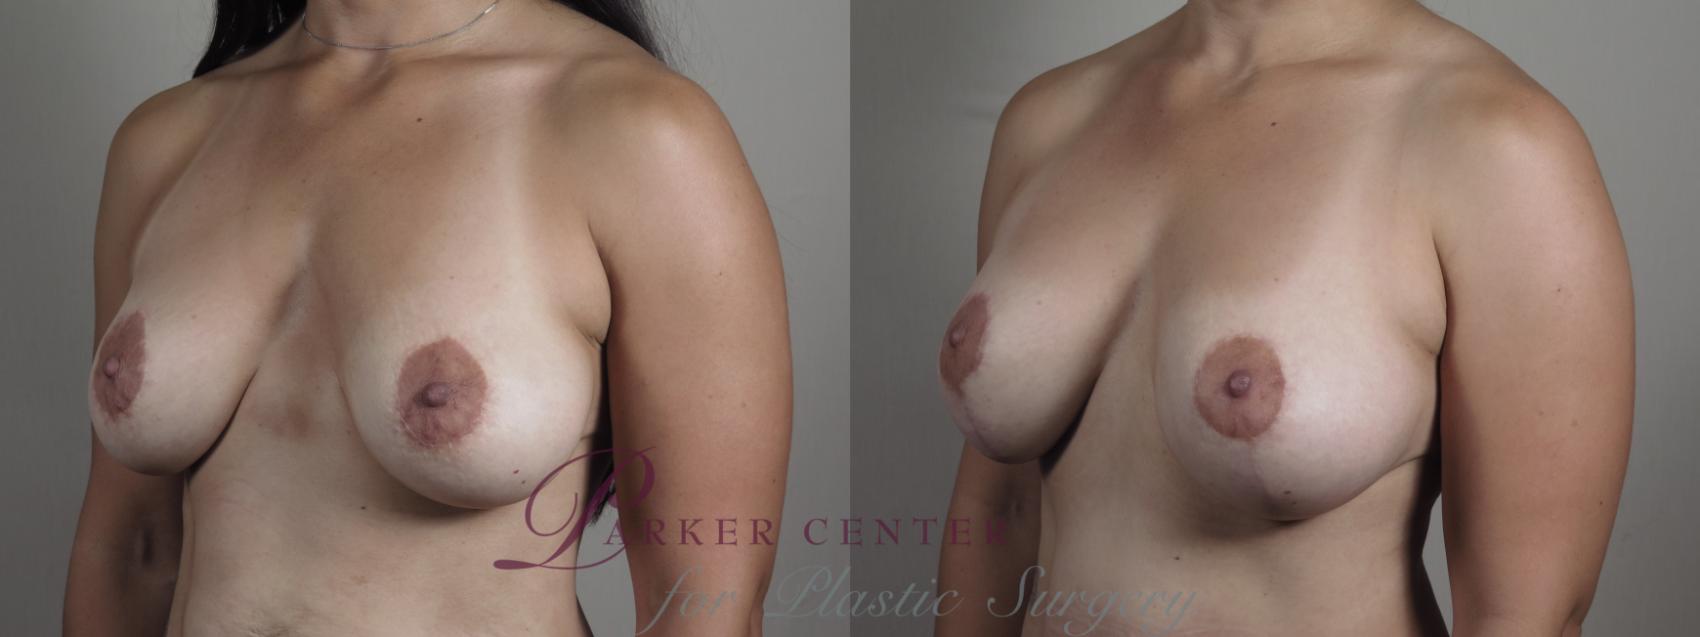 Breast Lift with Implants Case 975 Before & After right 3/4 b view 2 | Paramus, NJ | Parker Center for Plastic Surgery